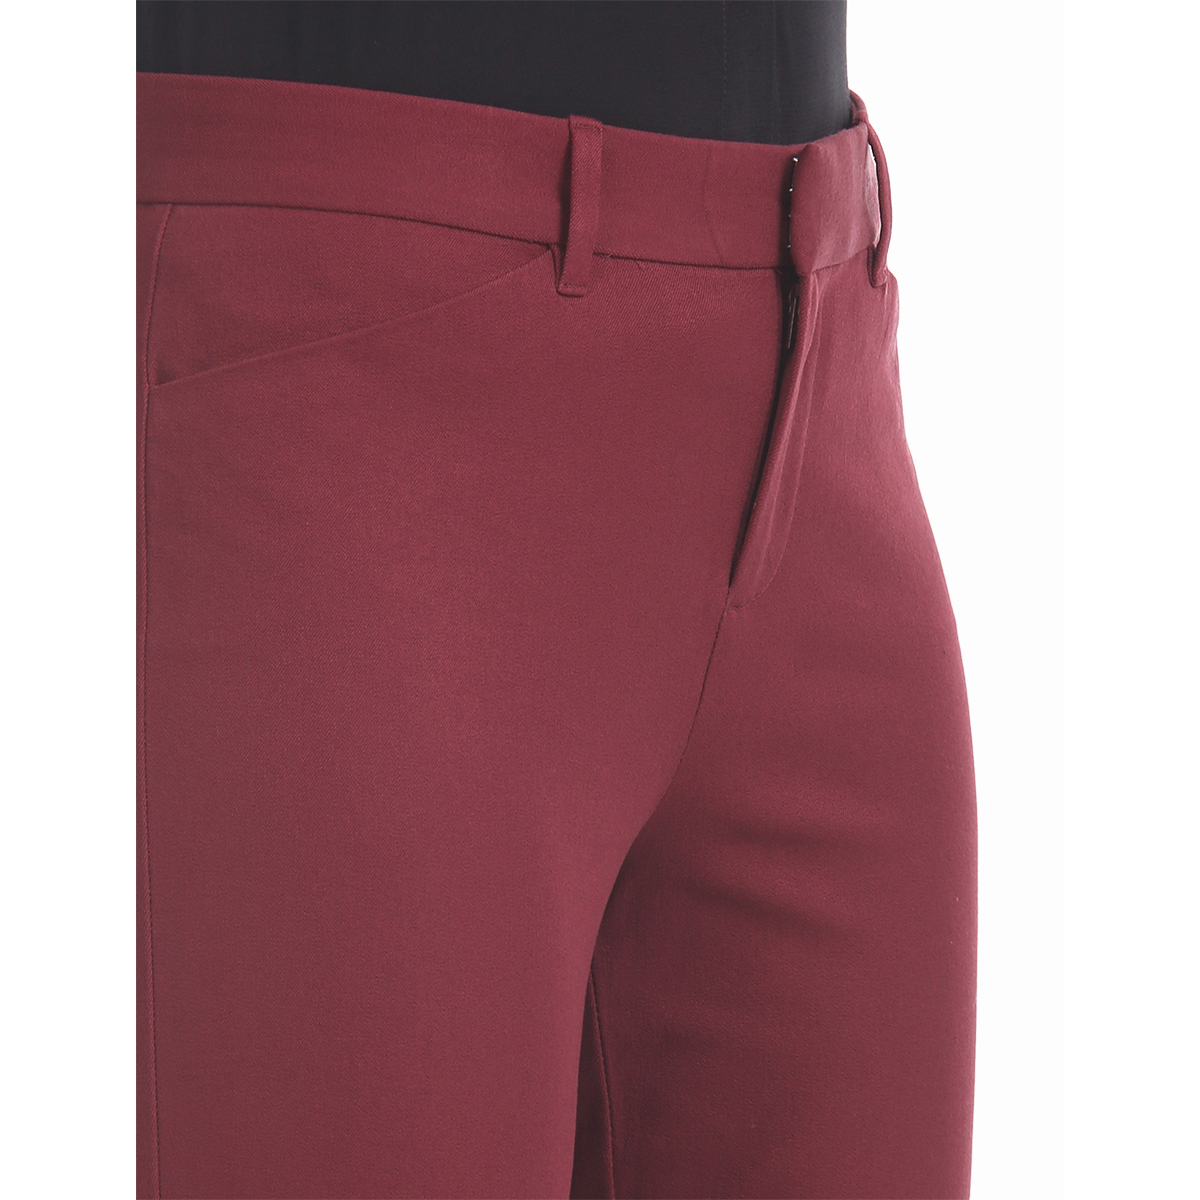 Gap Mid Rise Skinny Fit Solid Color Tregging - Maroon, Size-14